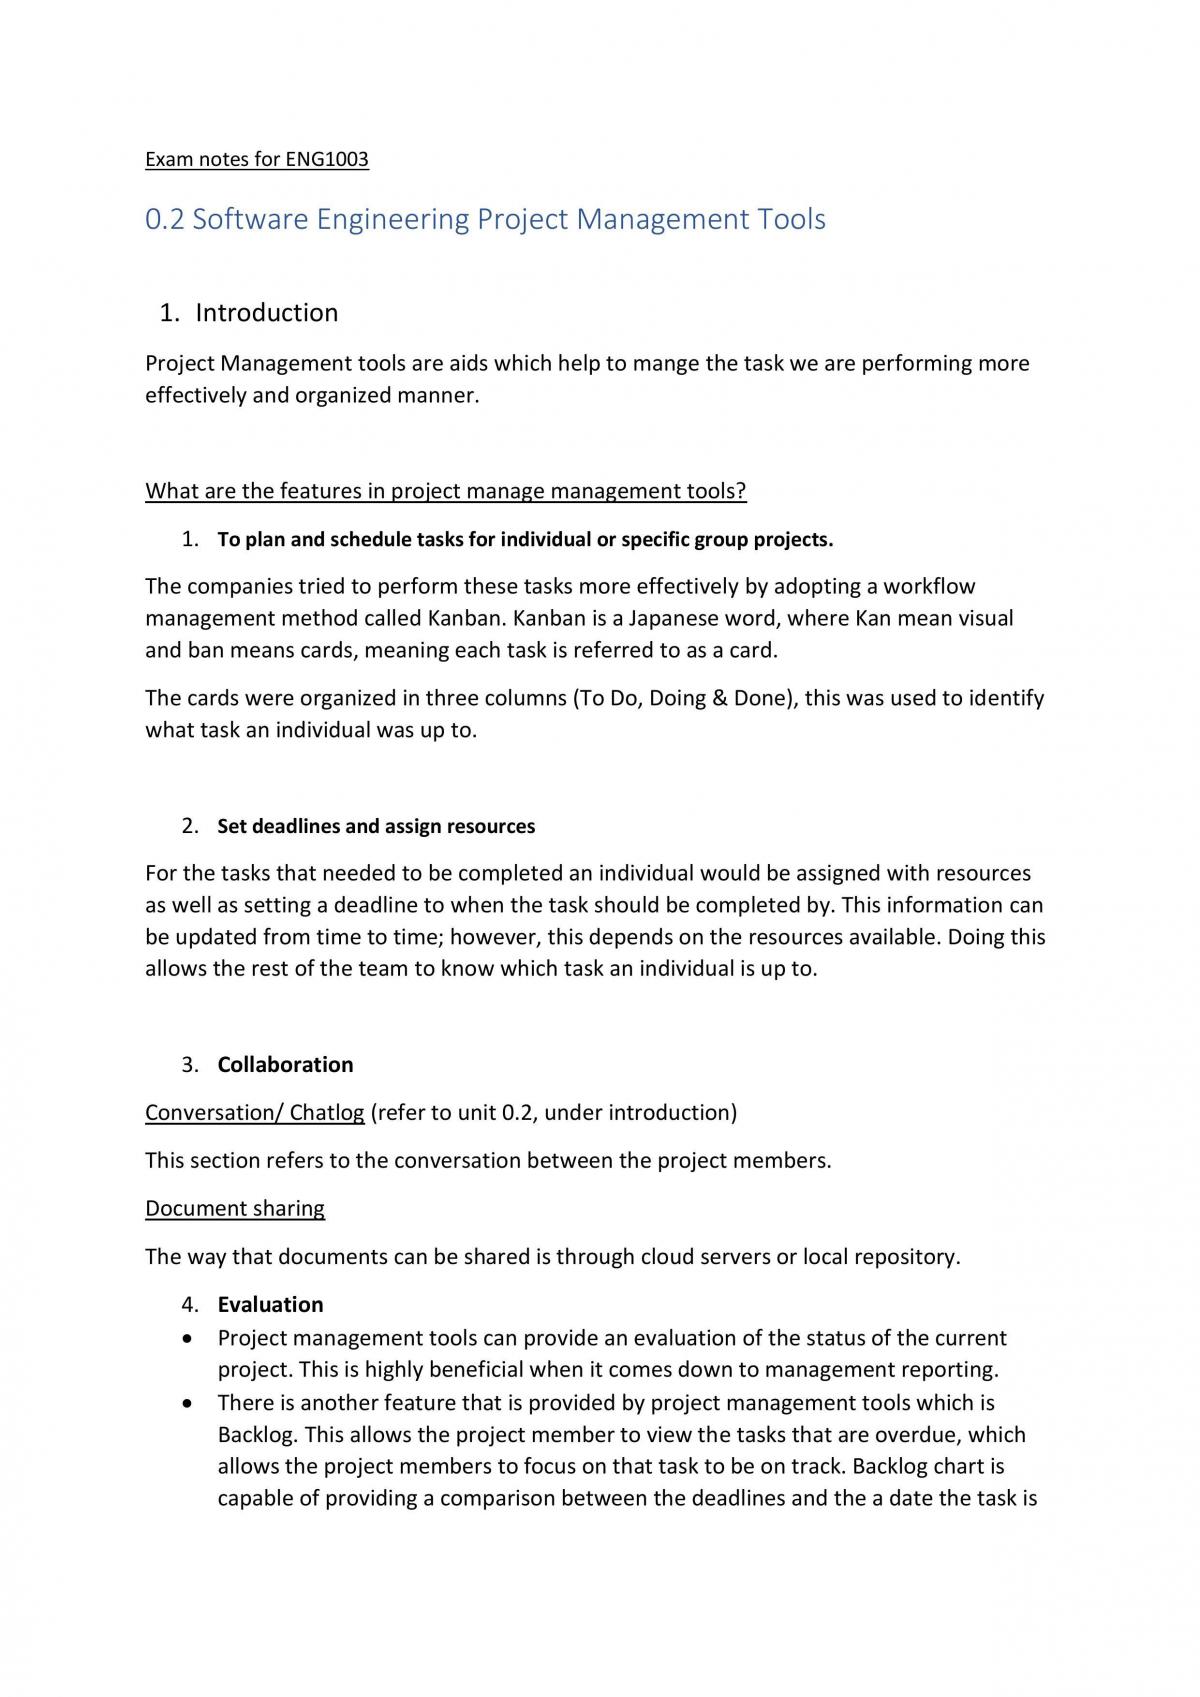 Exam full notes  - Page 1